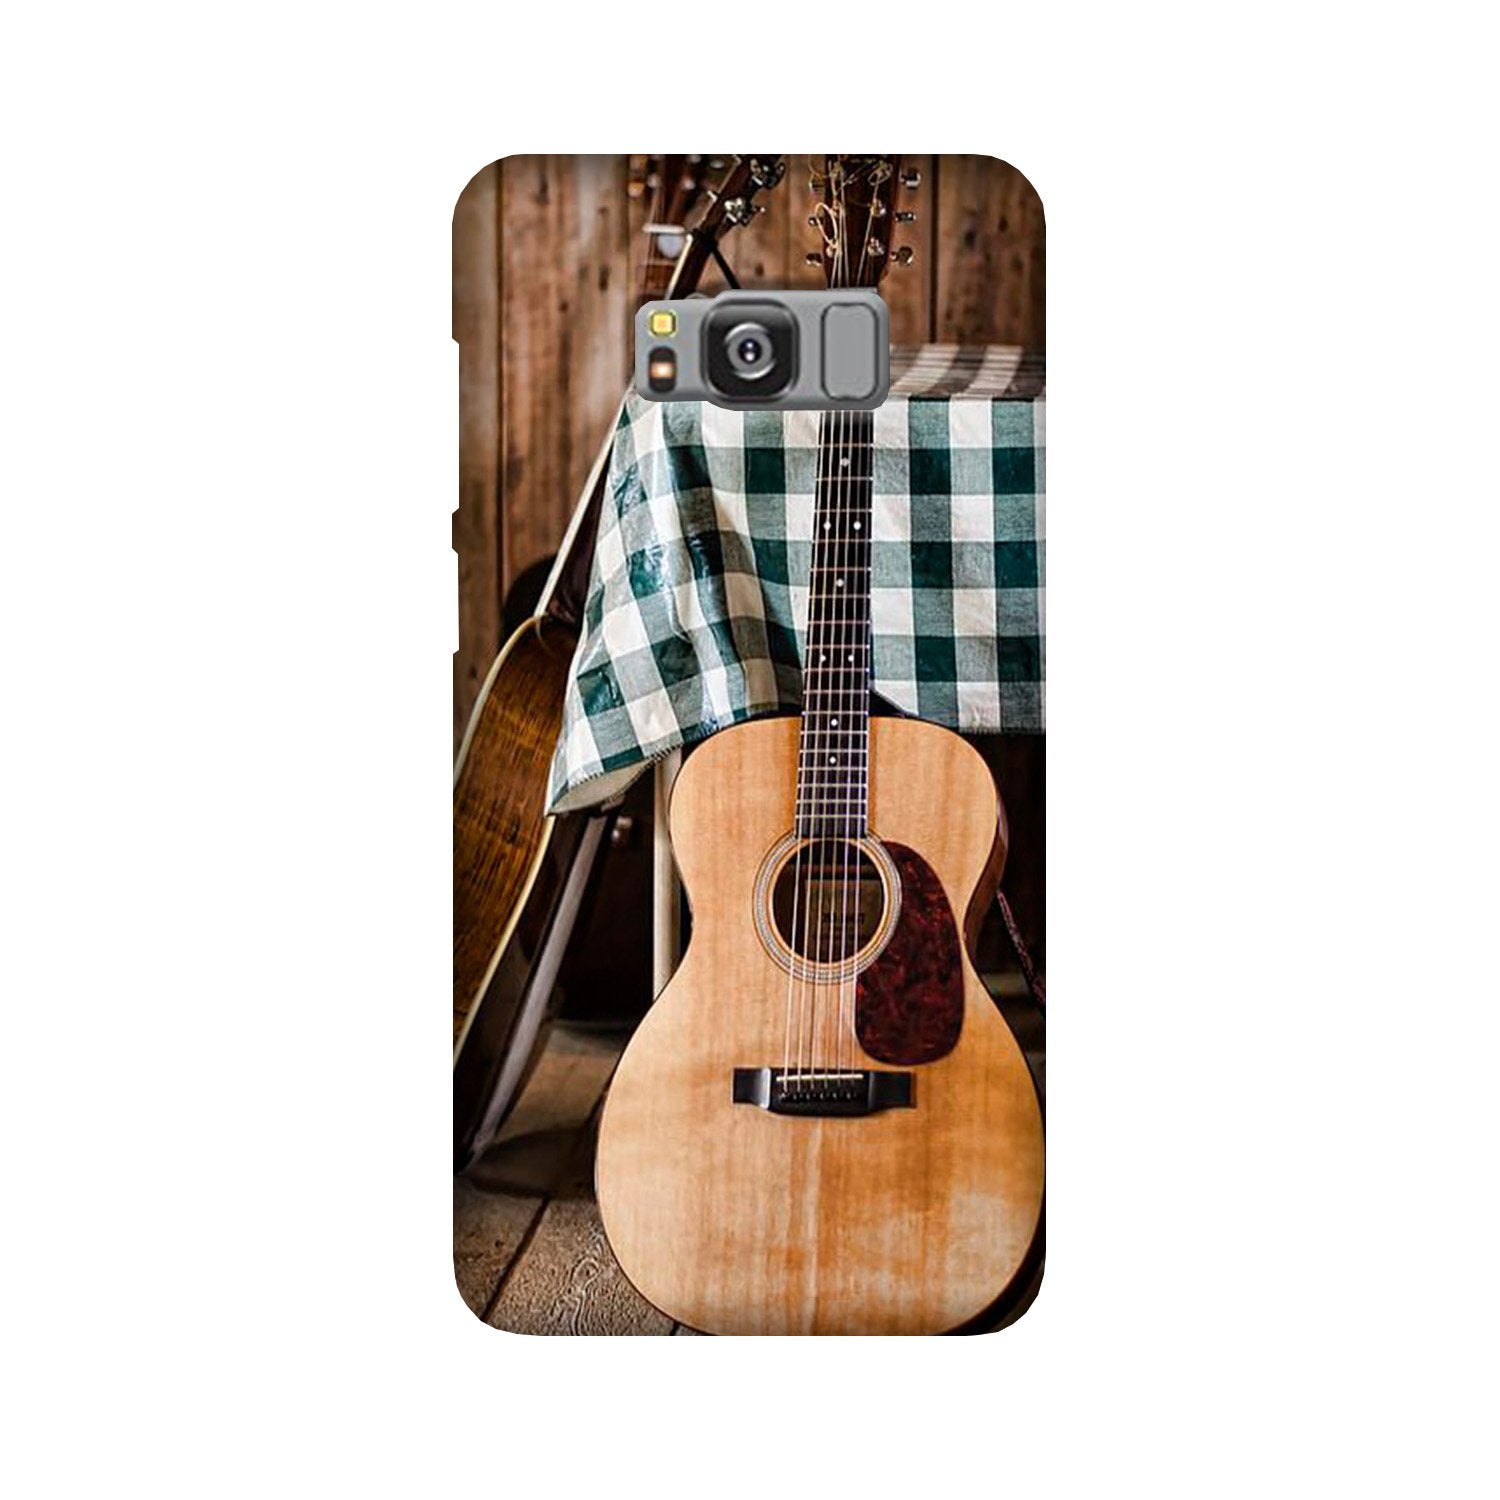 Guitar2 Case for Galaxy S8